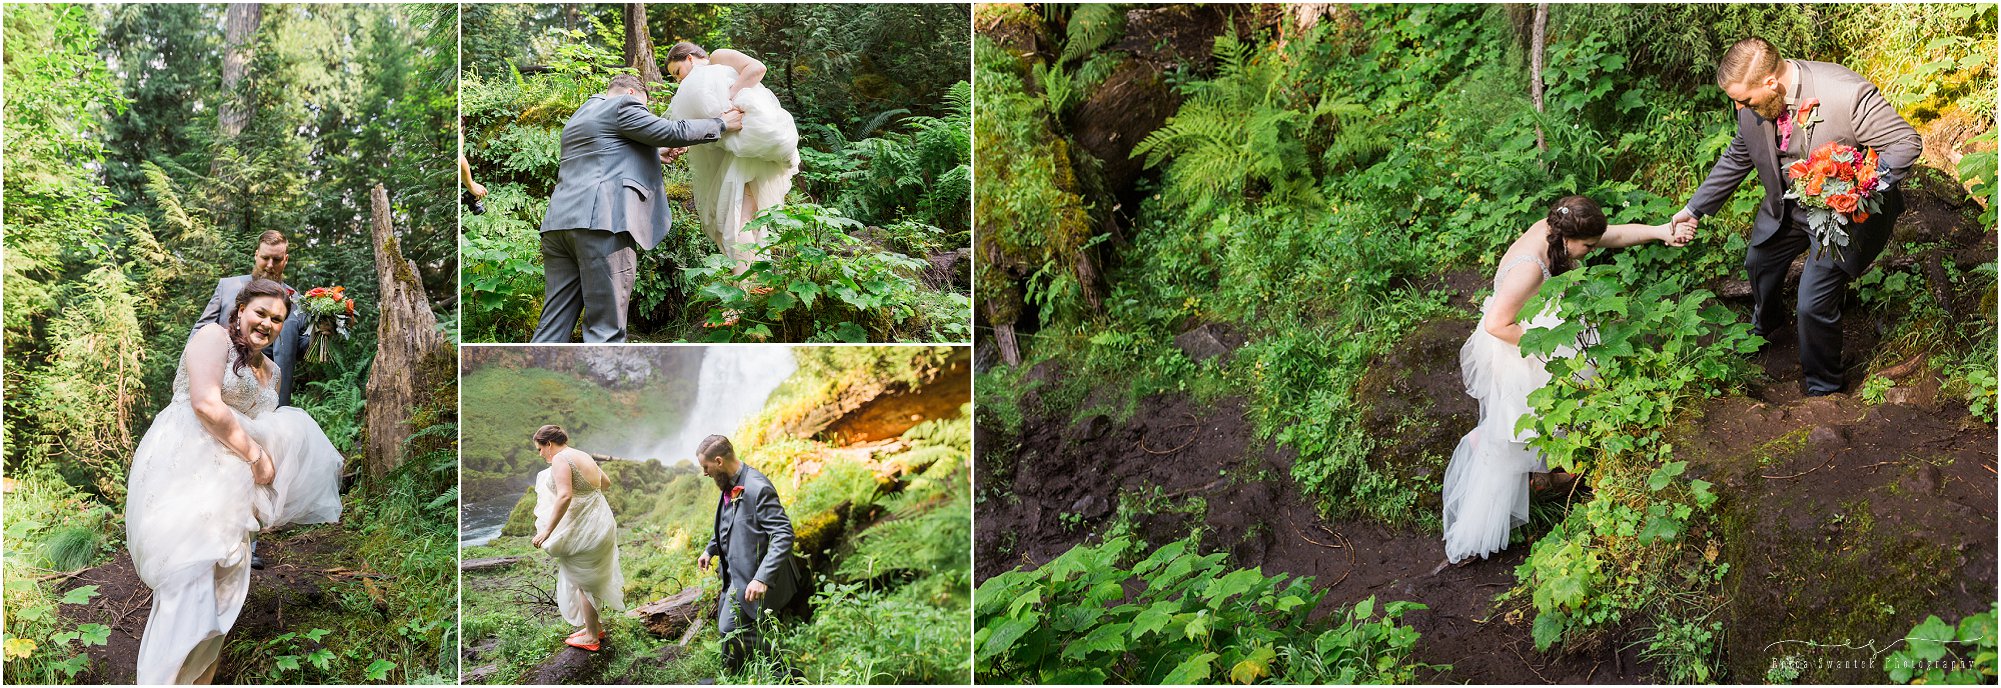 The groom helps his bride navigate the lush, mossy, wet landscape at their intimate Oregon waterfall wedding. | Erica Swantek Photography